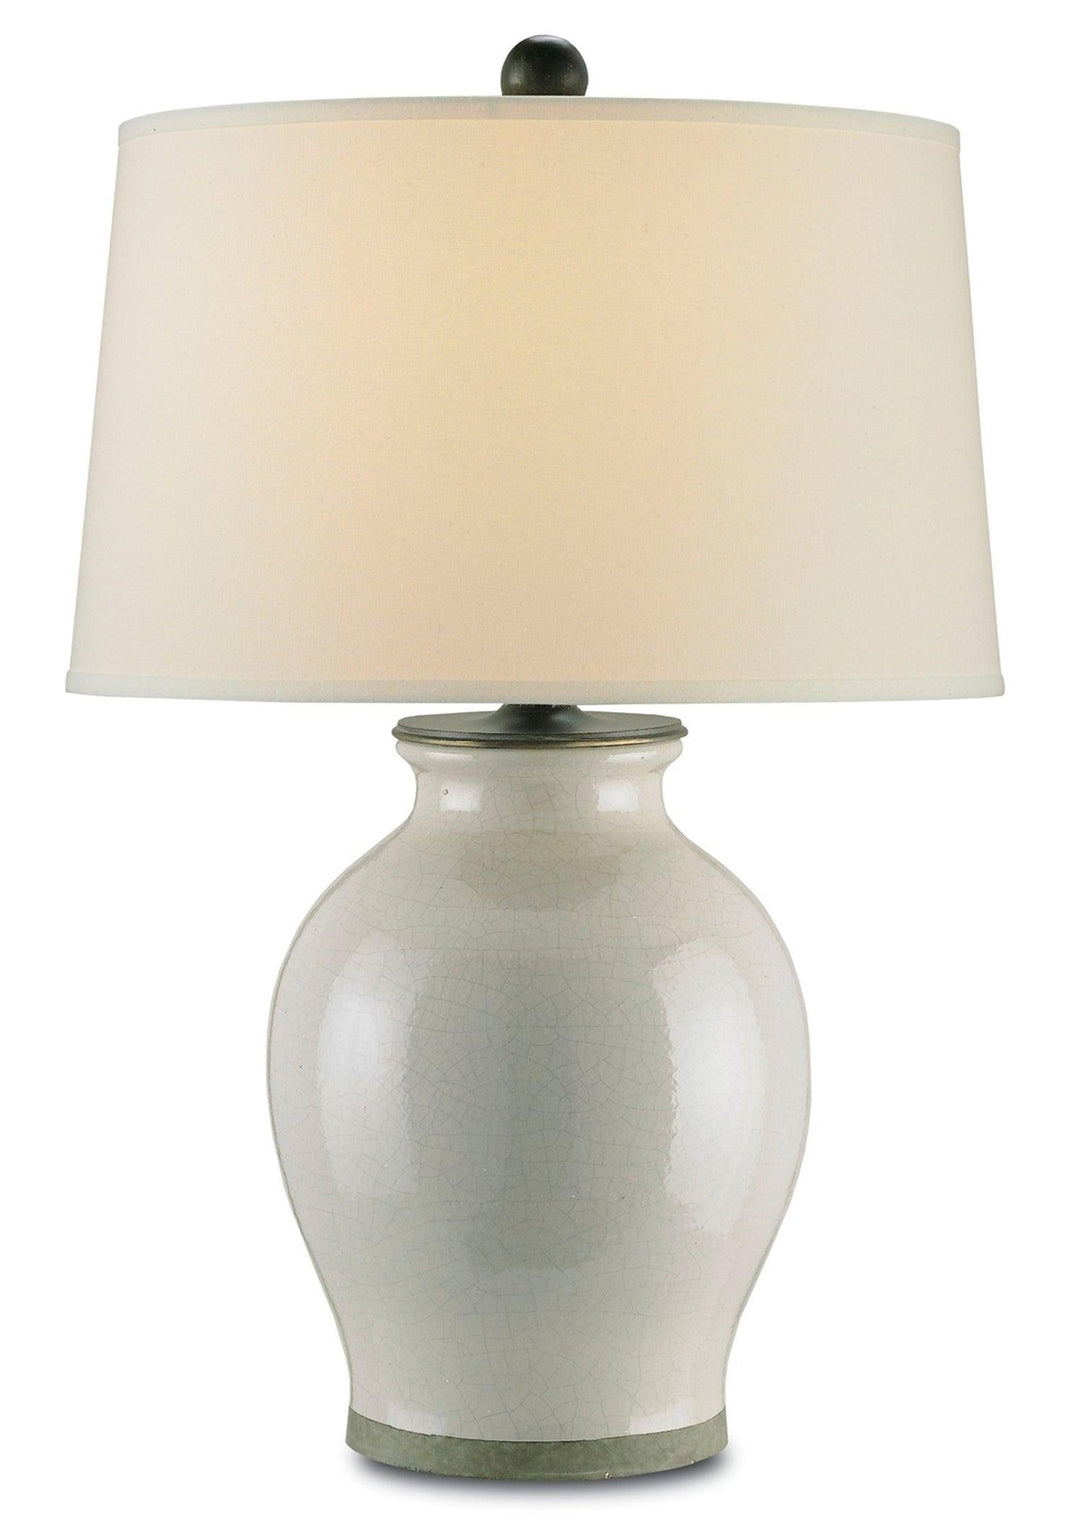 Fittleworth Table Lamp - Casey & Company